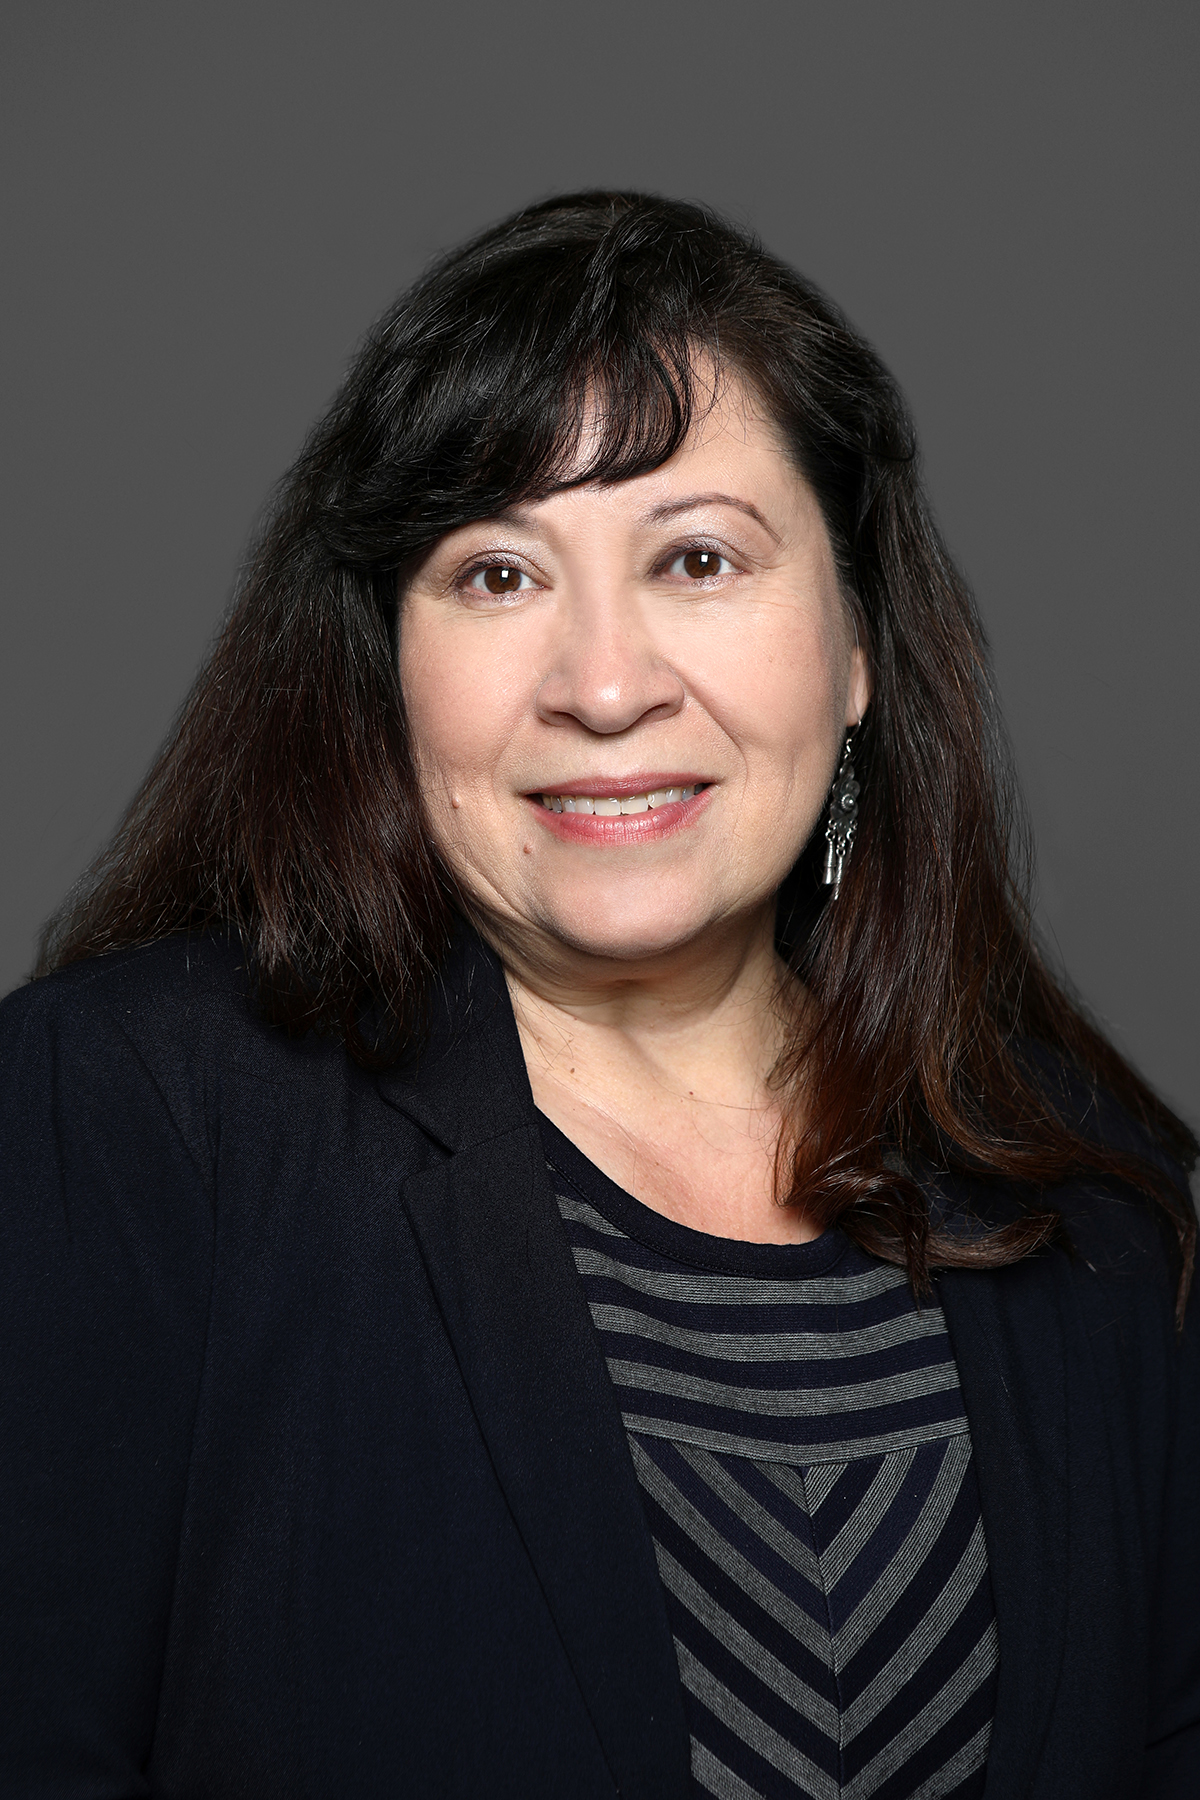 Guadalupe Corral, Ph.D